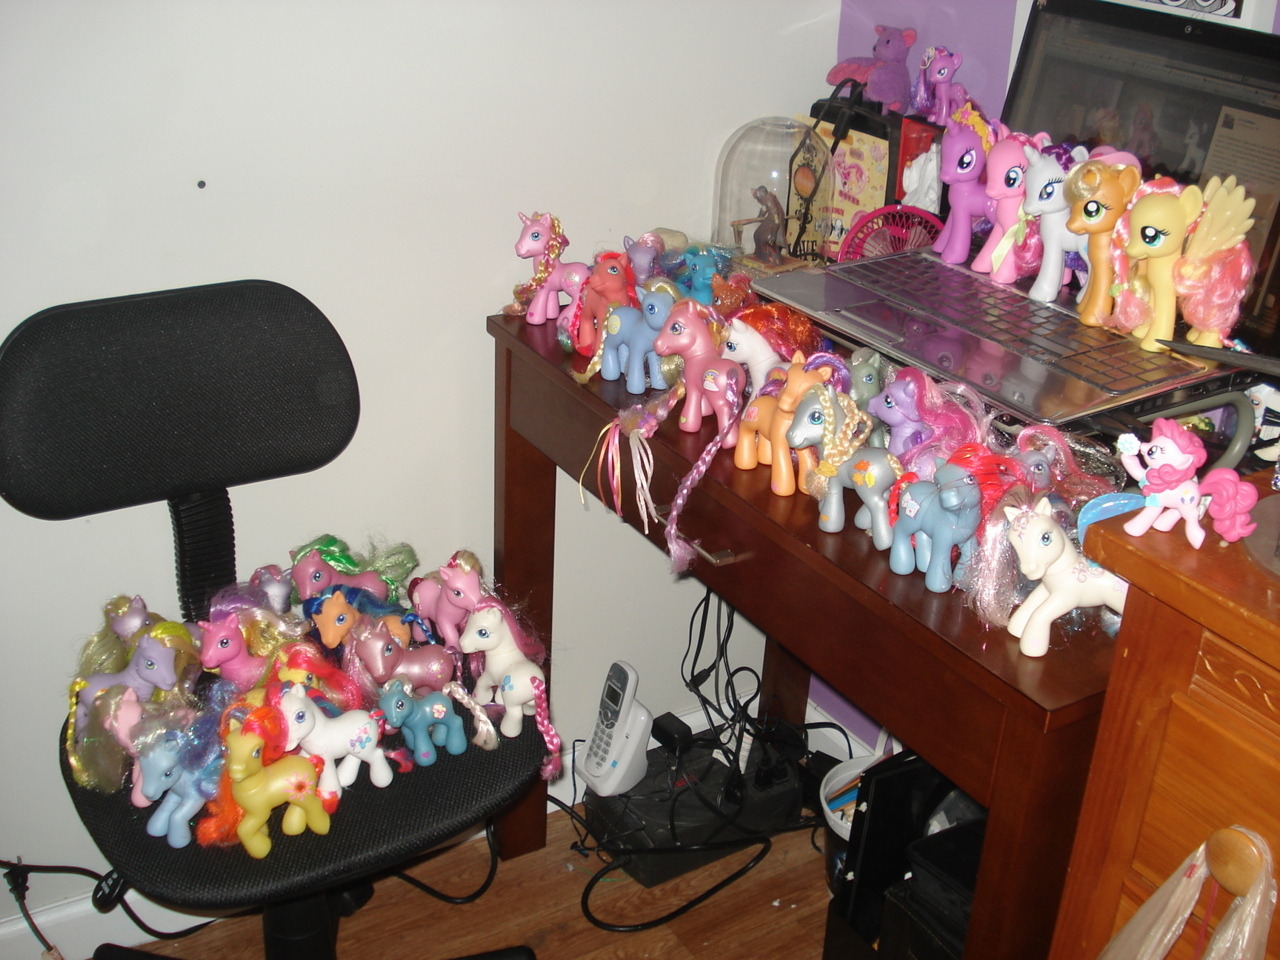 cklikestogame:  I got bored and decided to take my ponies out from storage because